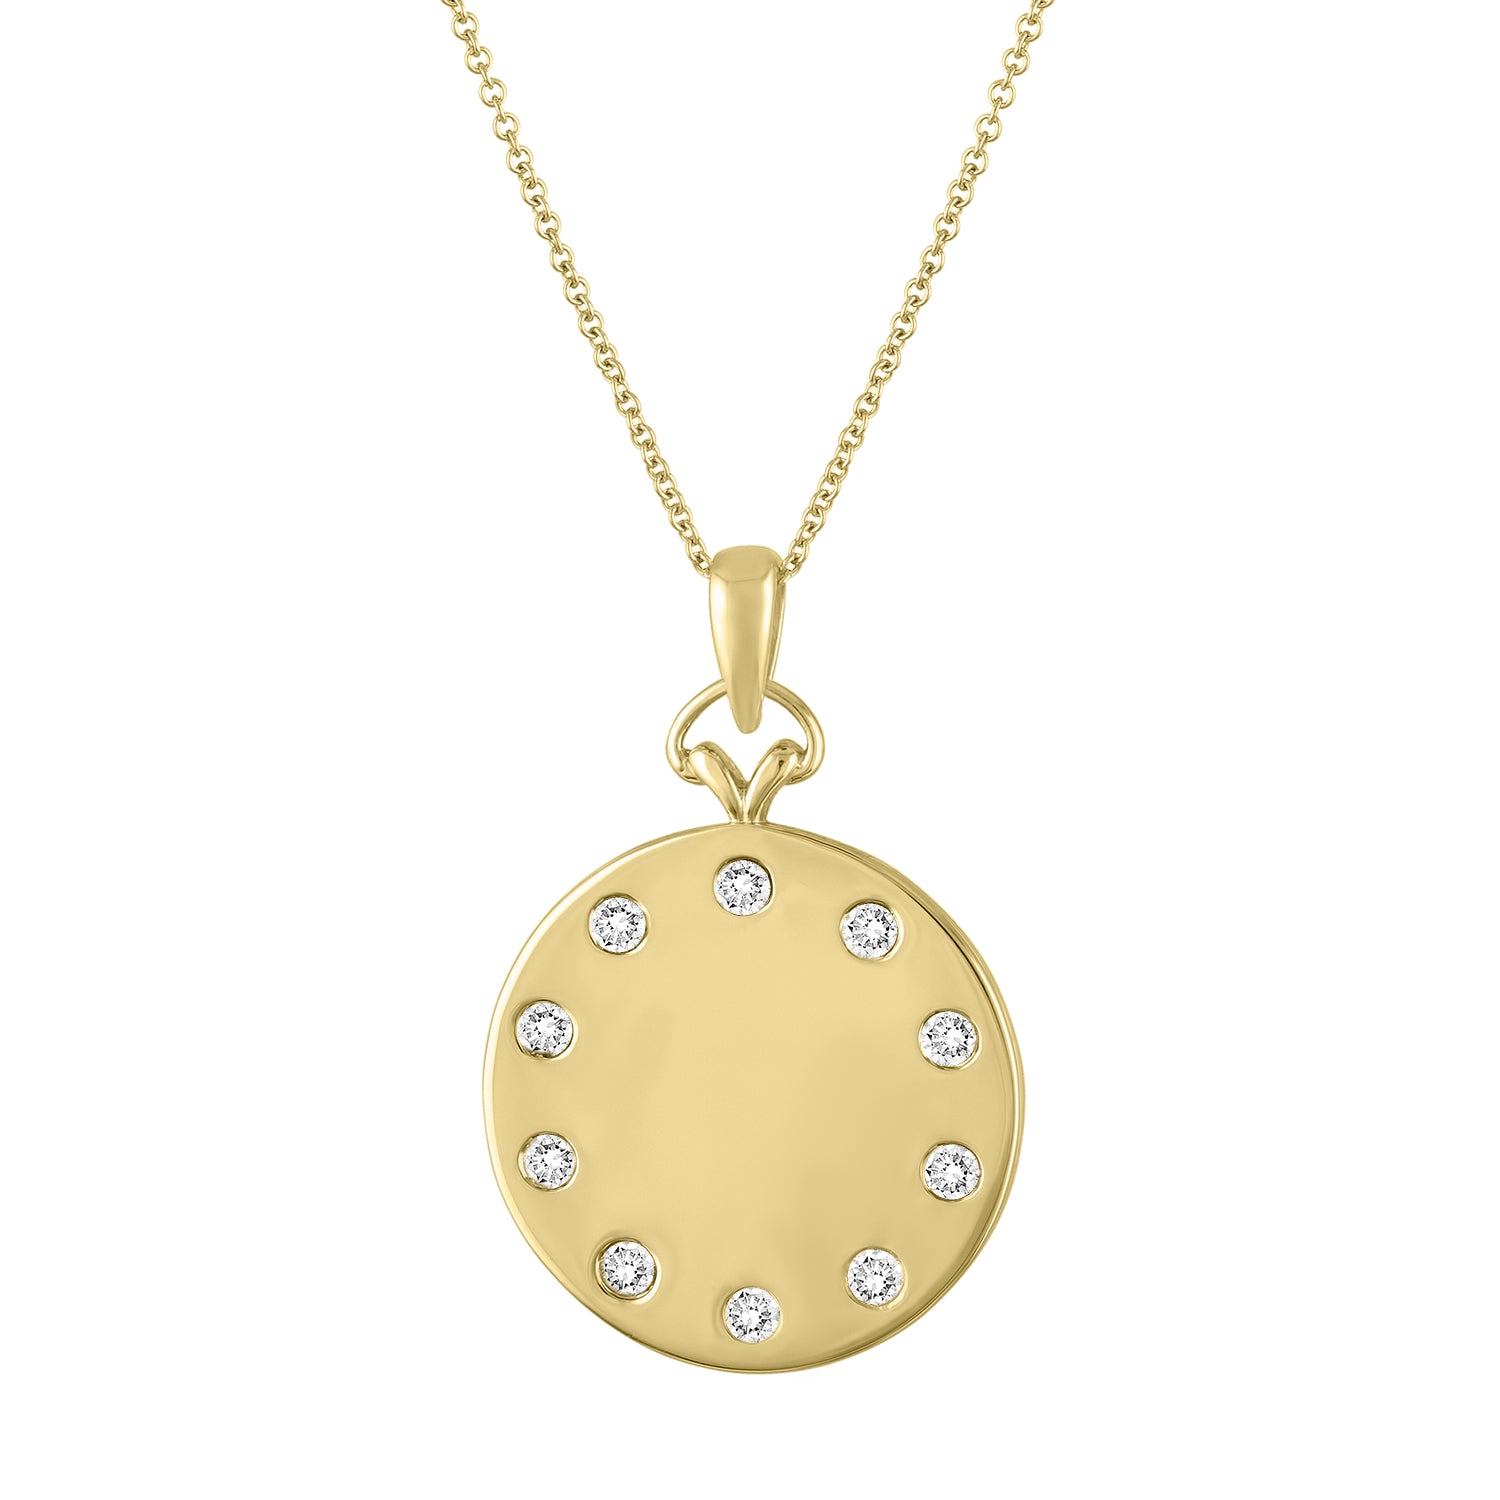 Yellow gold disc necklace with round diamonds around the border.